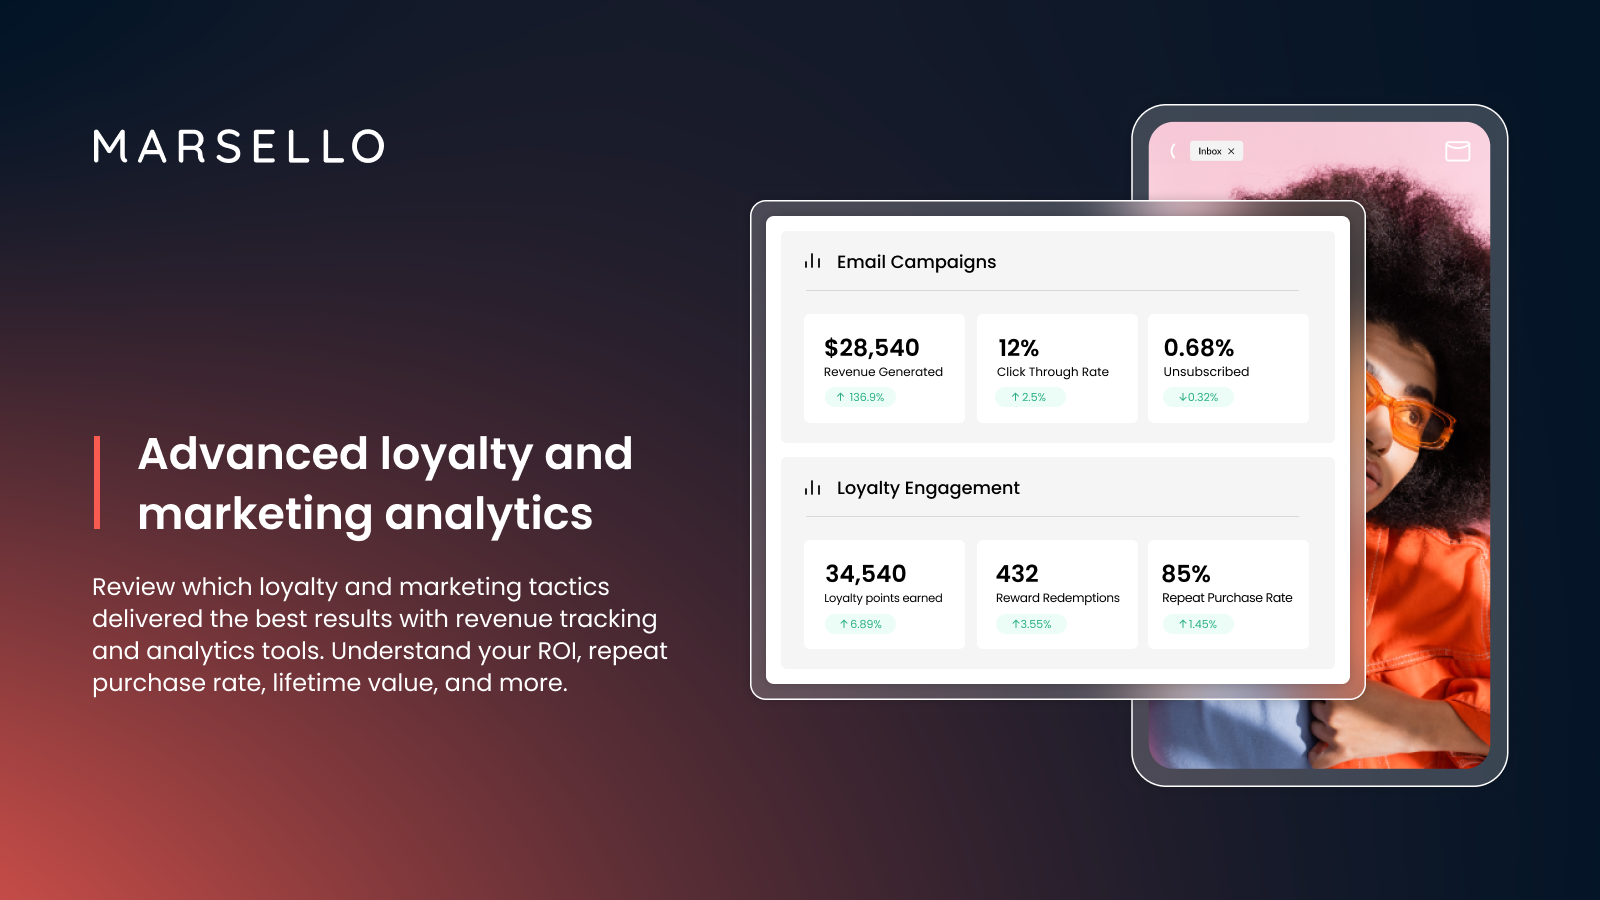 Advanced loyalty and marketing analytics tools to see what works